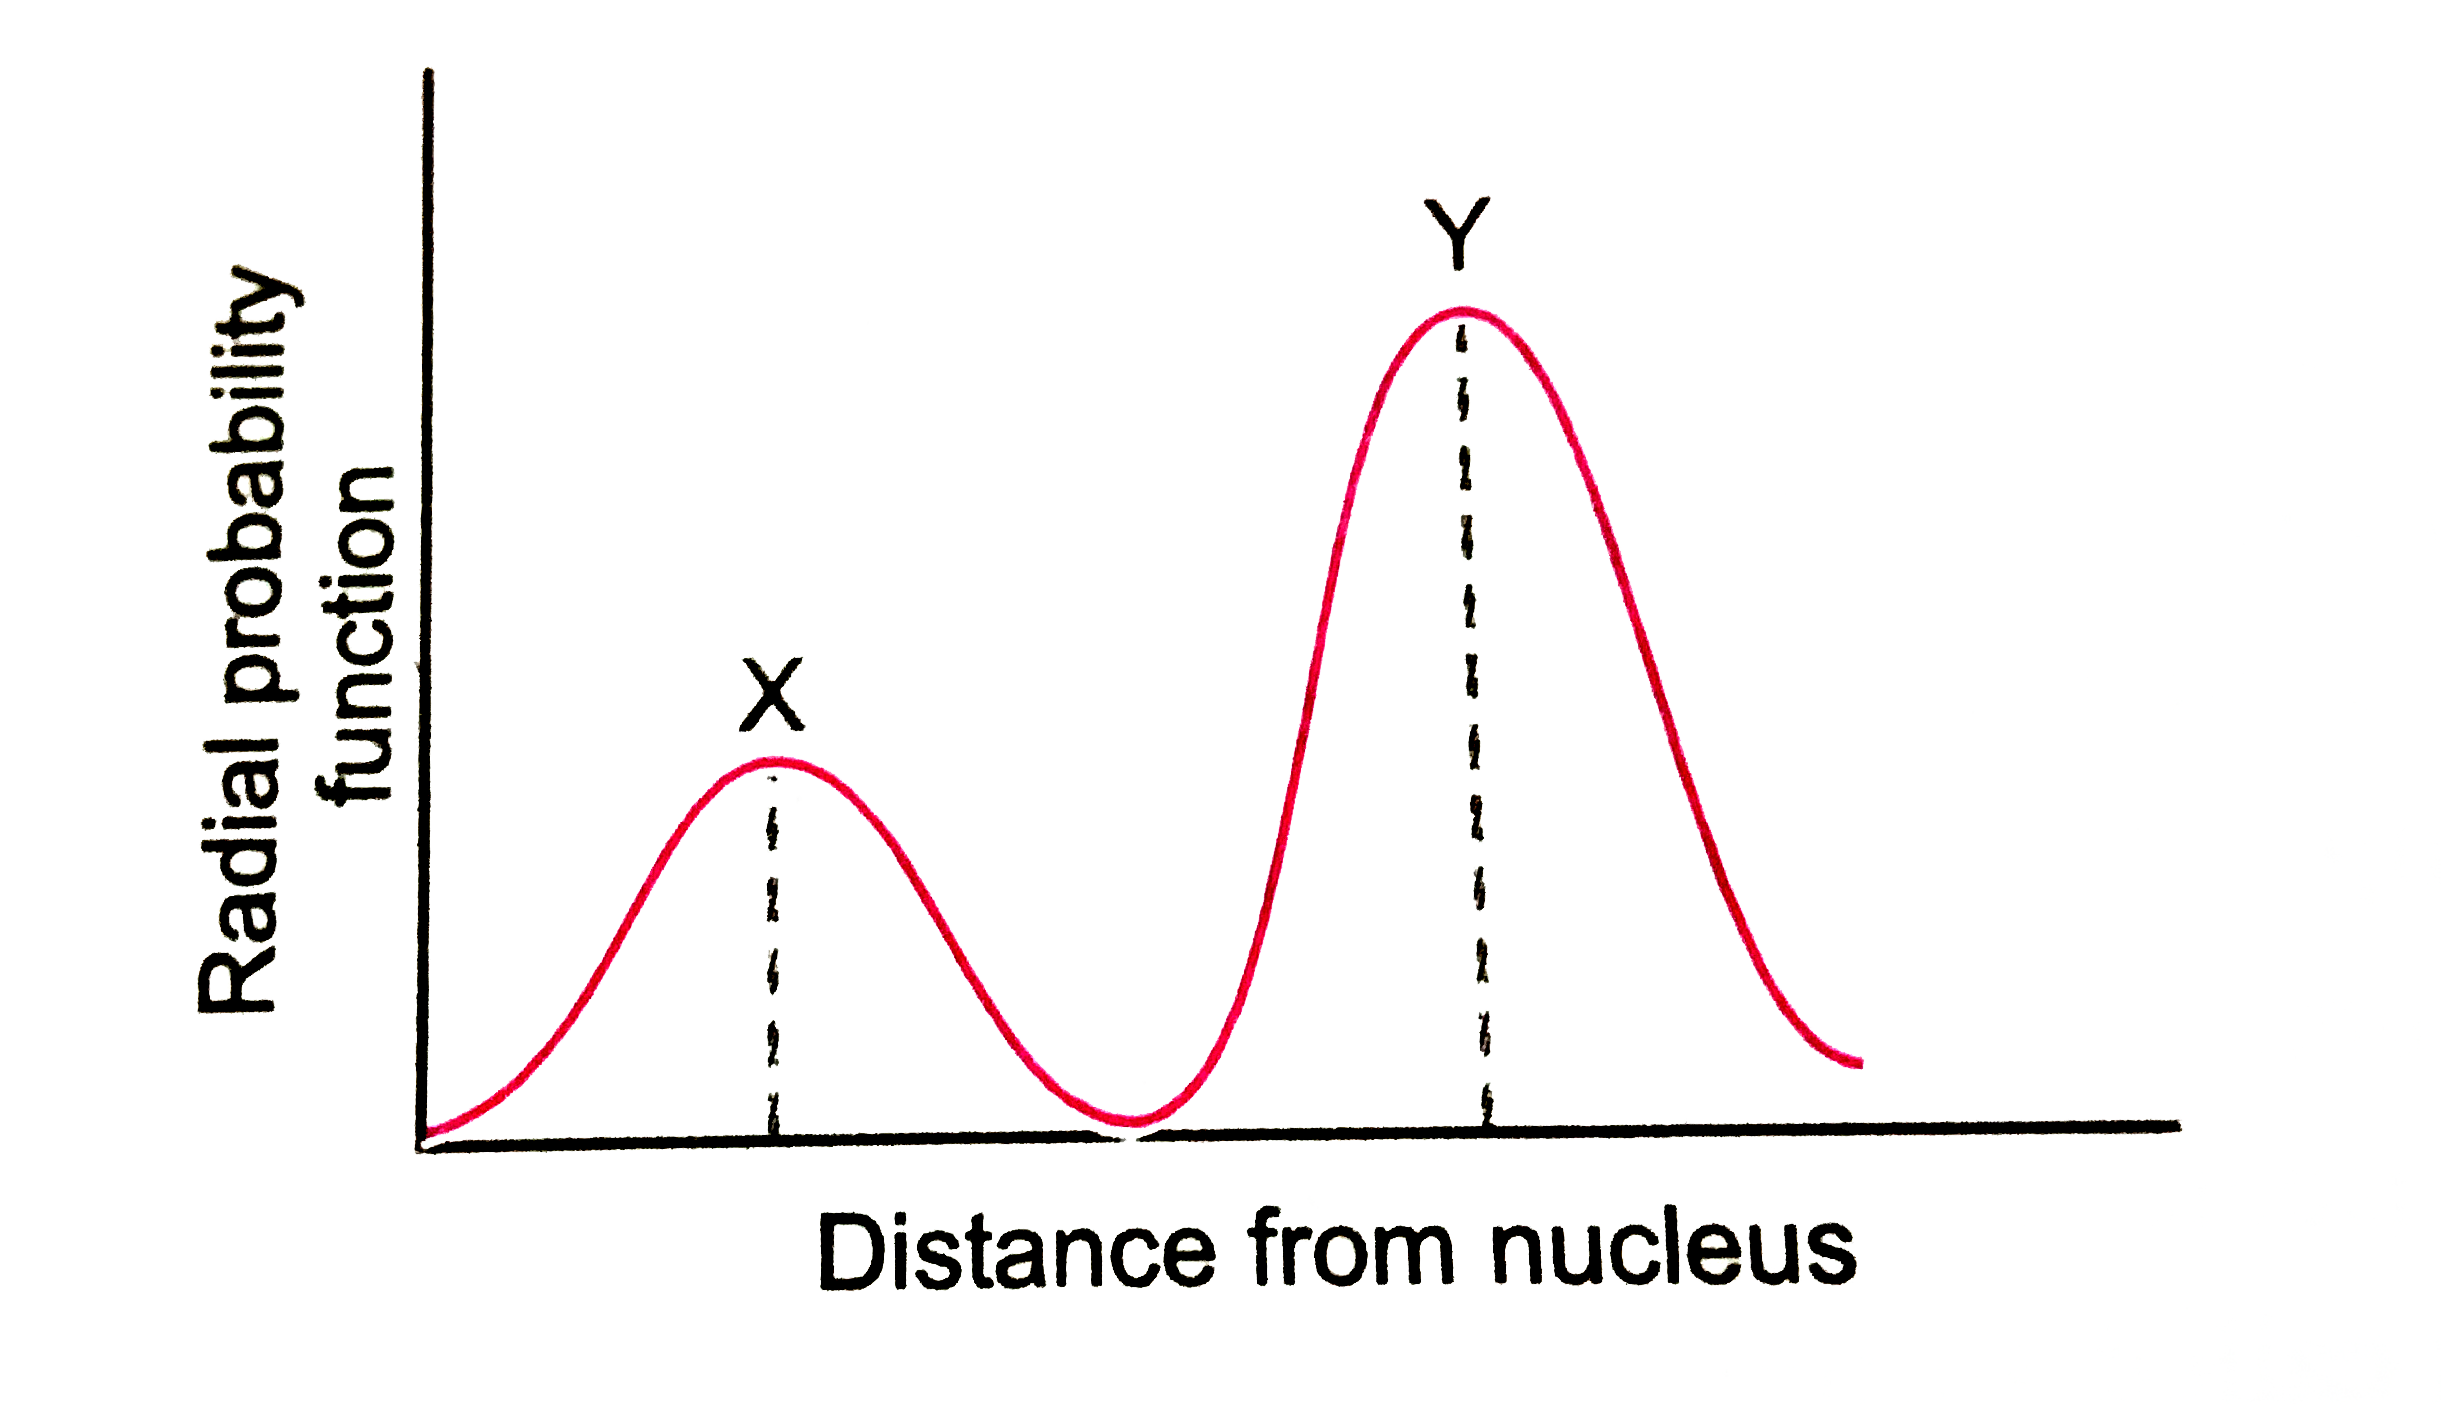 The plot of radial probability function versus distance from nucleus for 2s orbital is given below :      Calculate the distance between the peaks X and Y